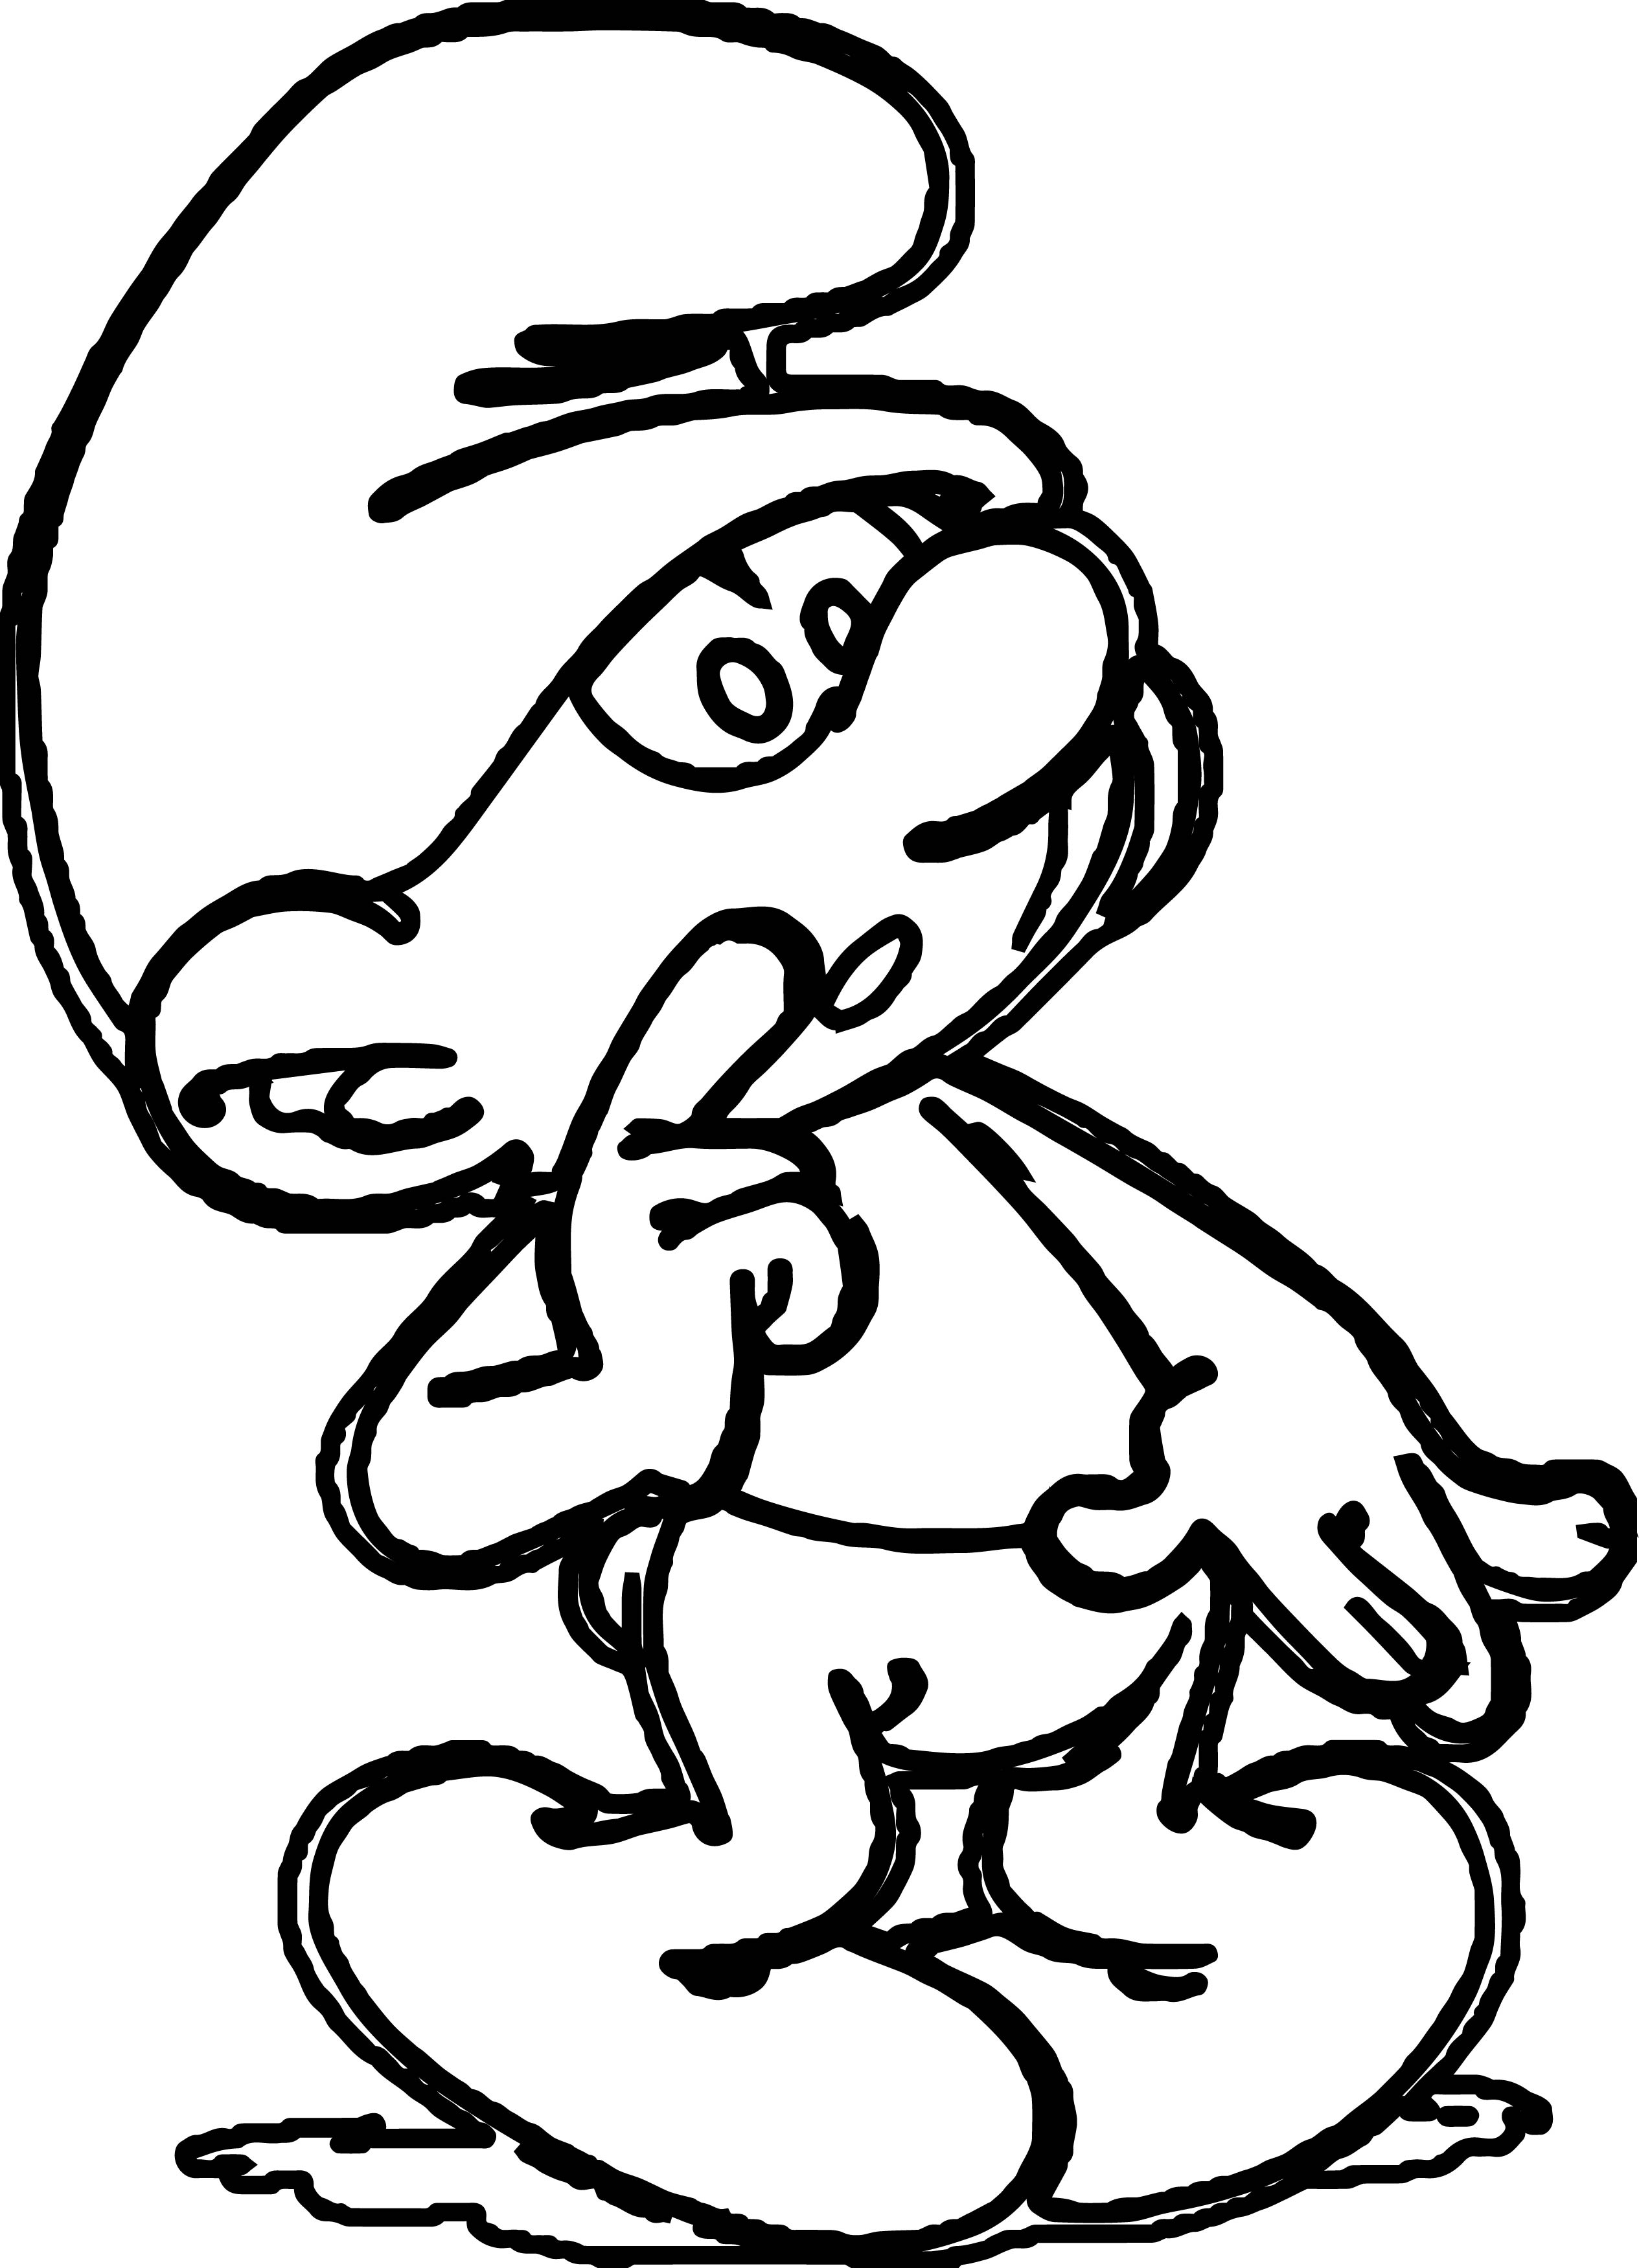 Clumsy Smurf Coloring Page | Wecoloringpage.com